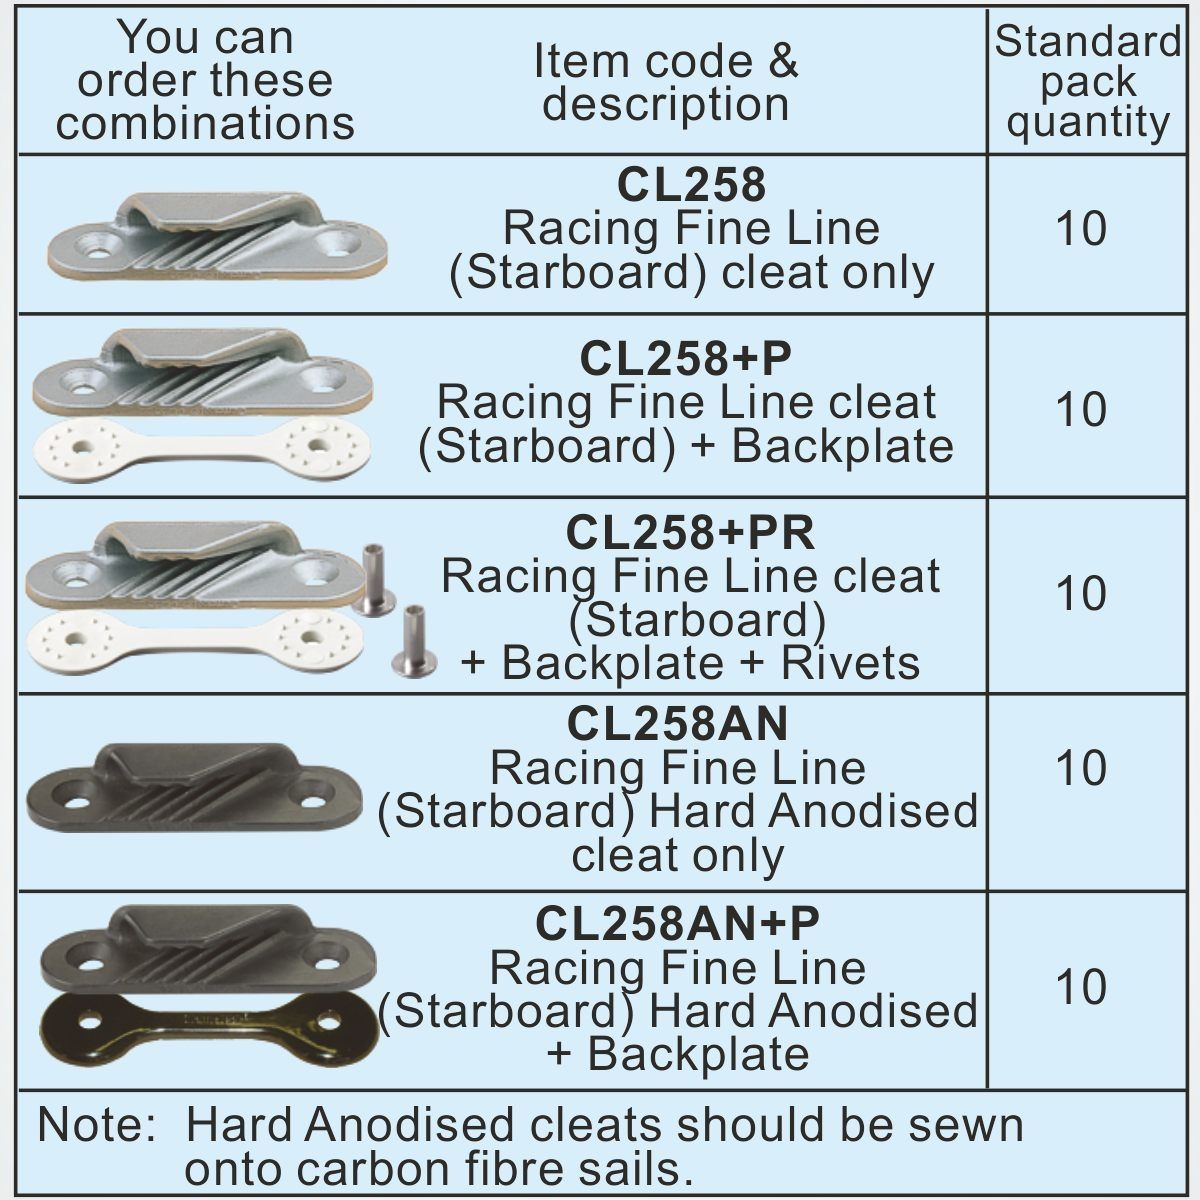 Clamcleat Racing Fine Line, Styrbord